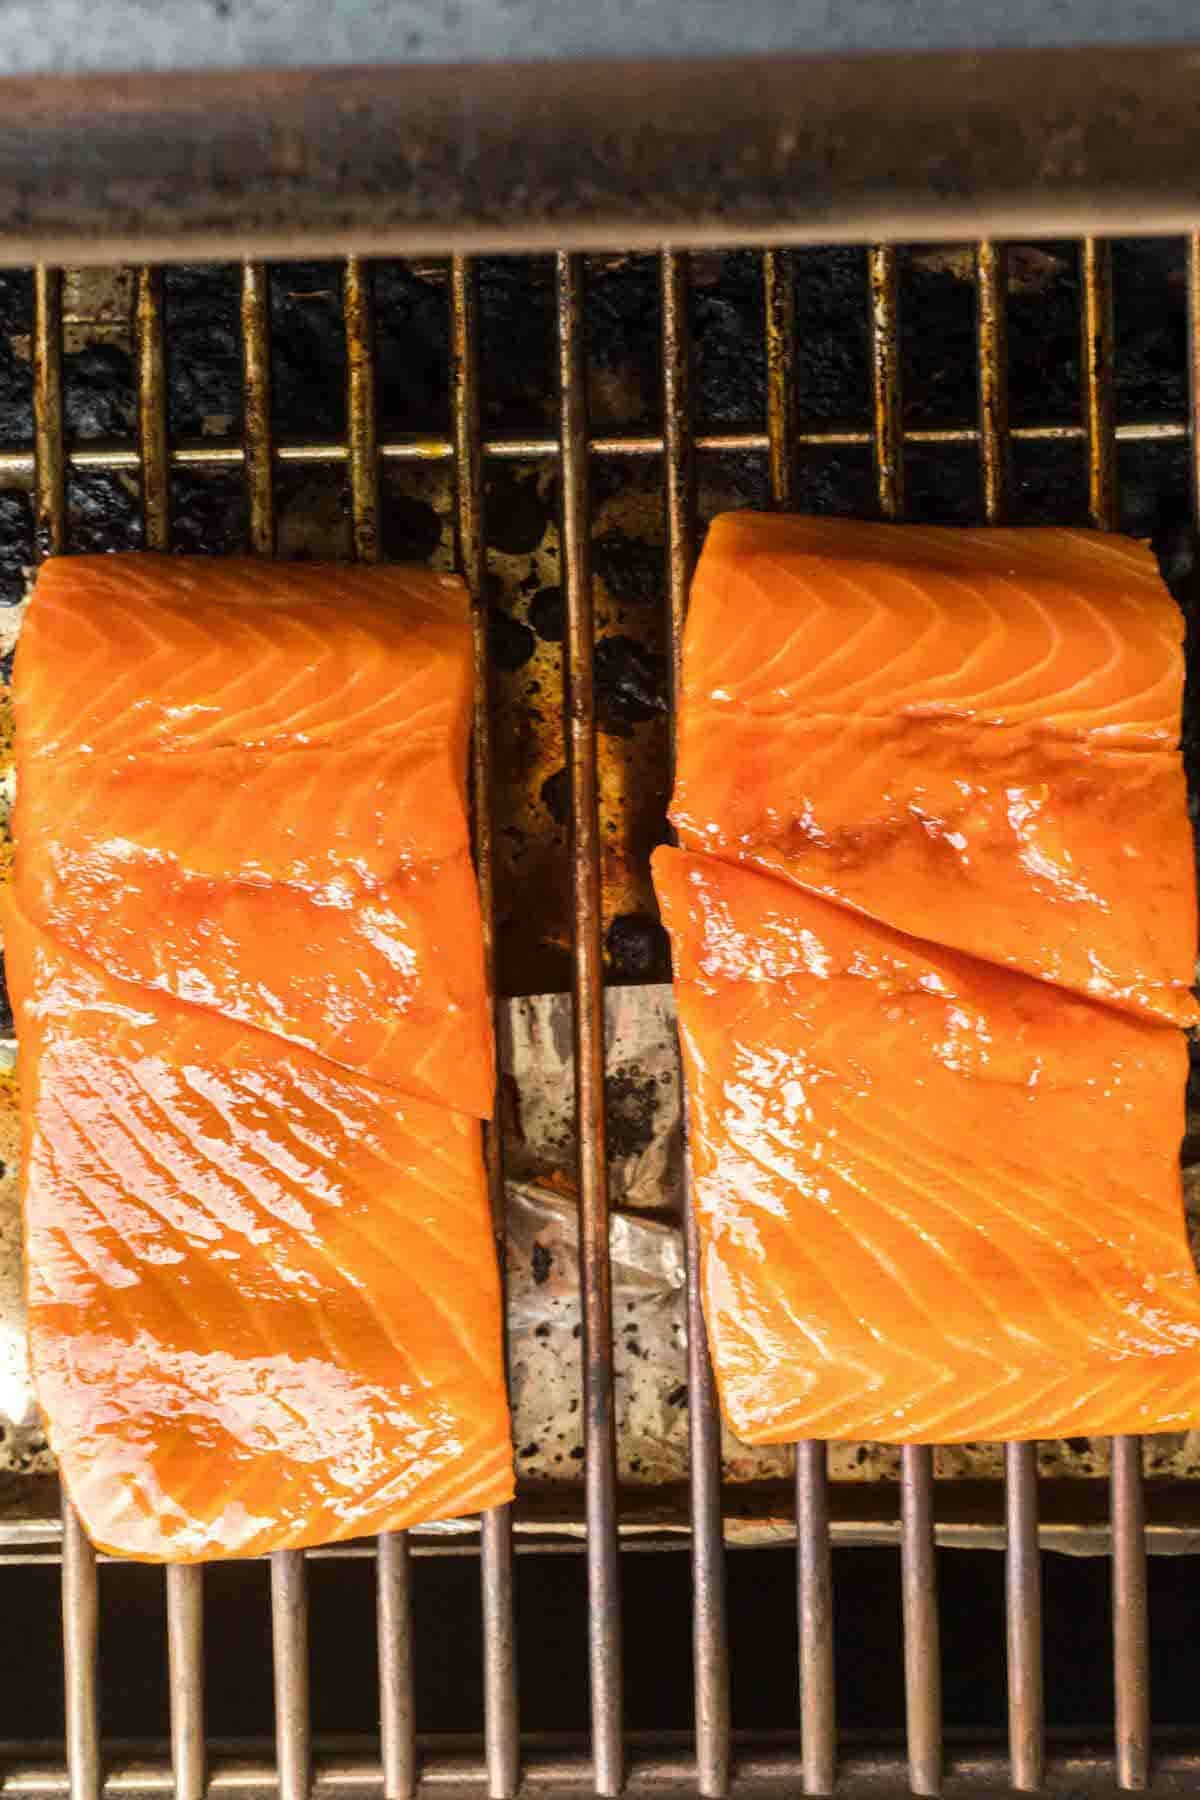 salmon pieces on the grill grates.